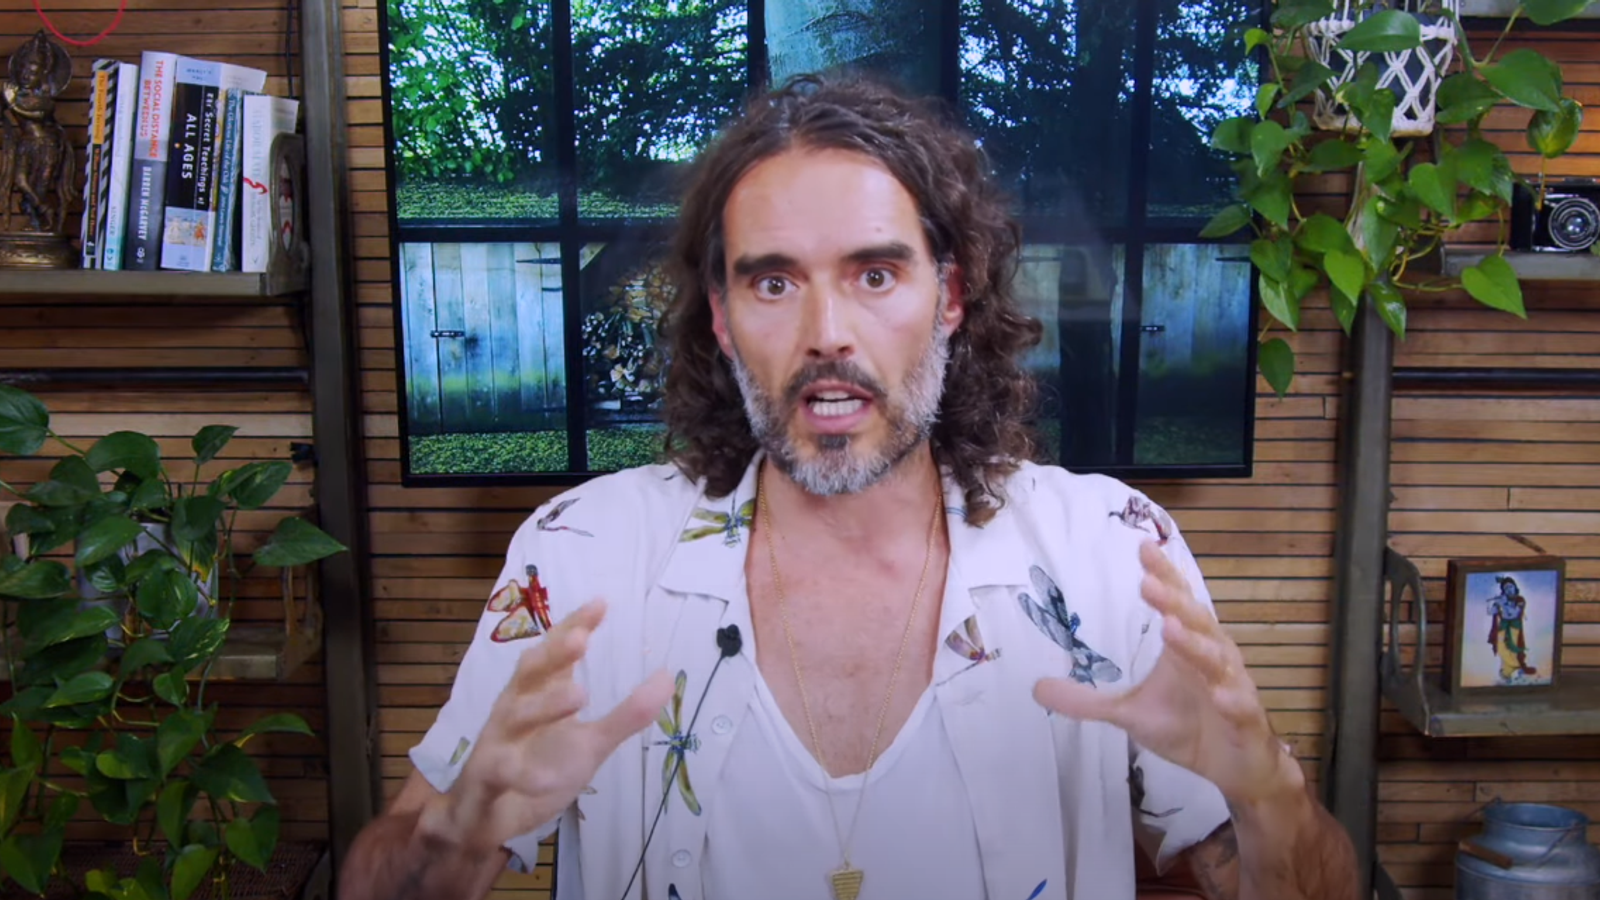 Russell Brand denies 'serious criminal allegations' he claims are being made against him